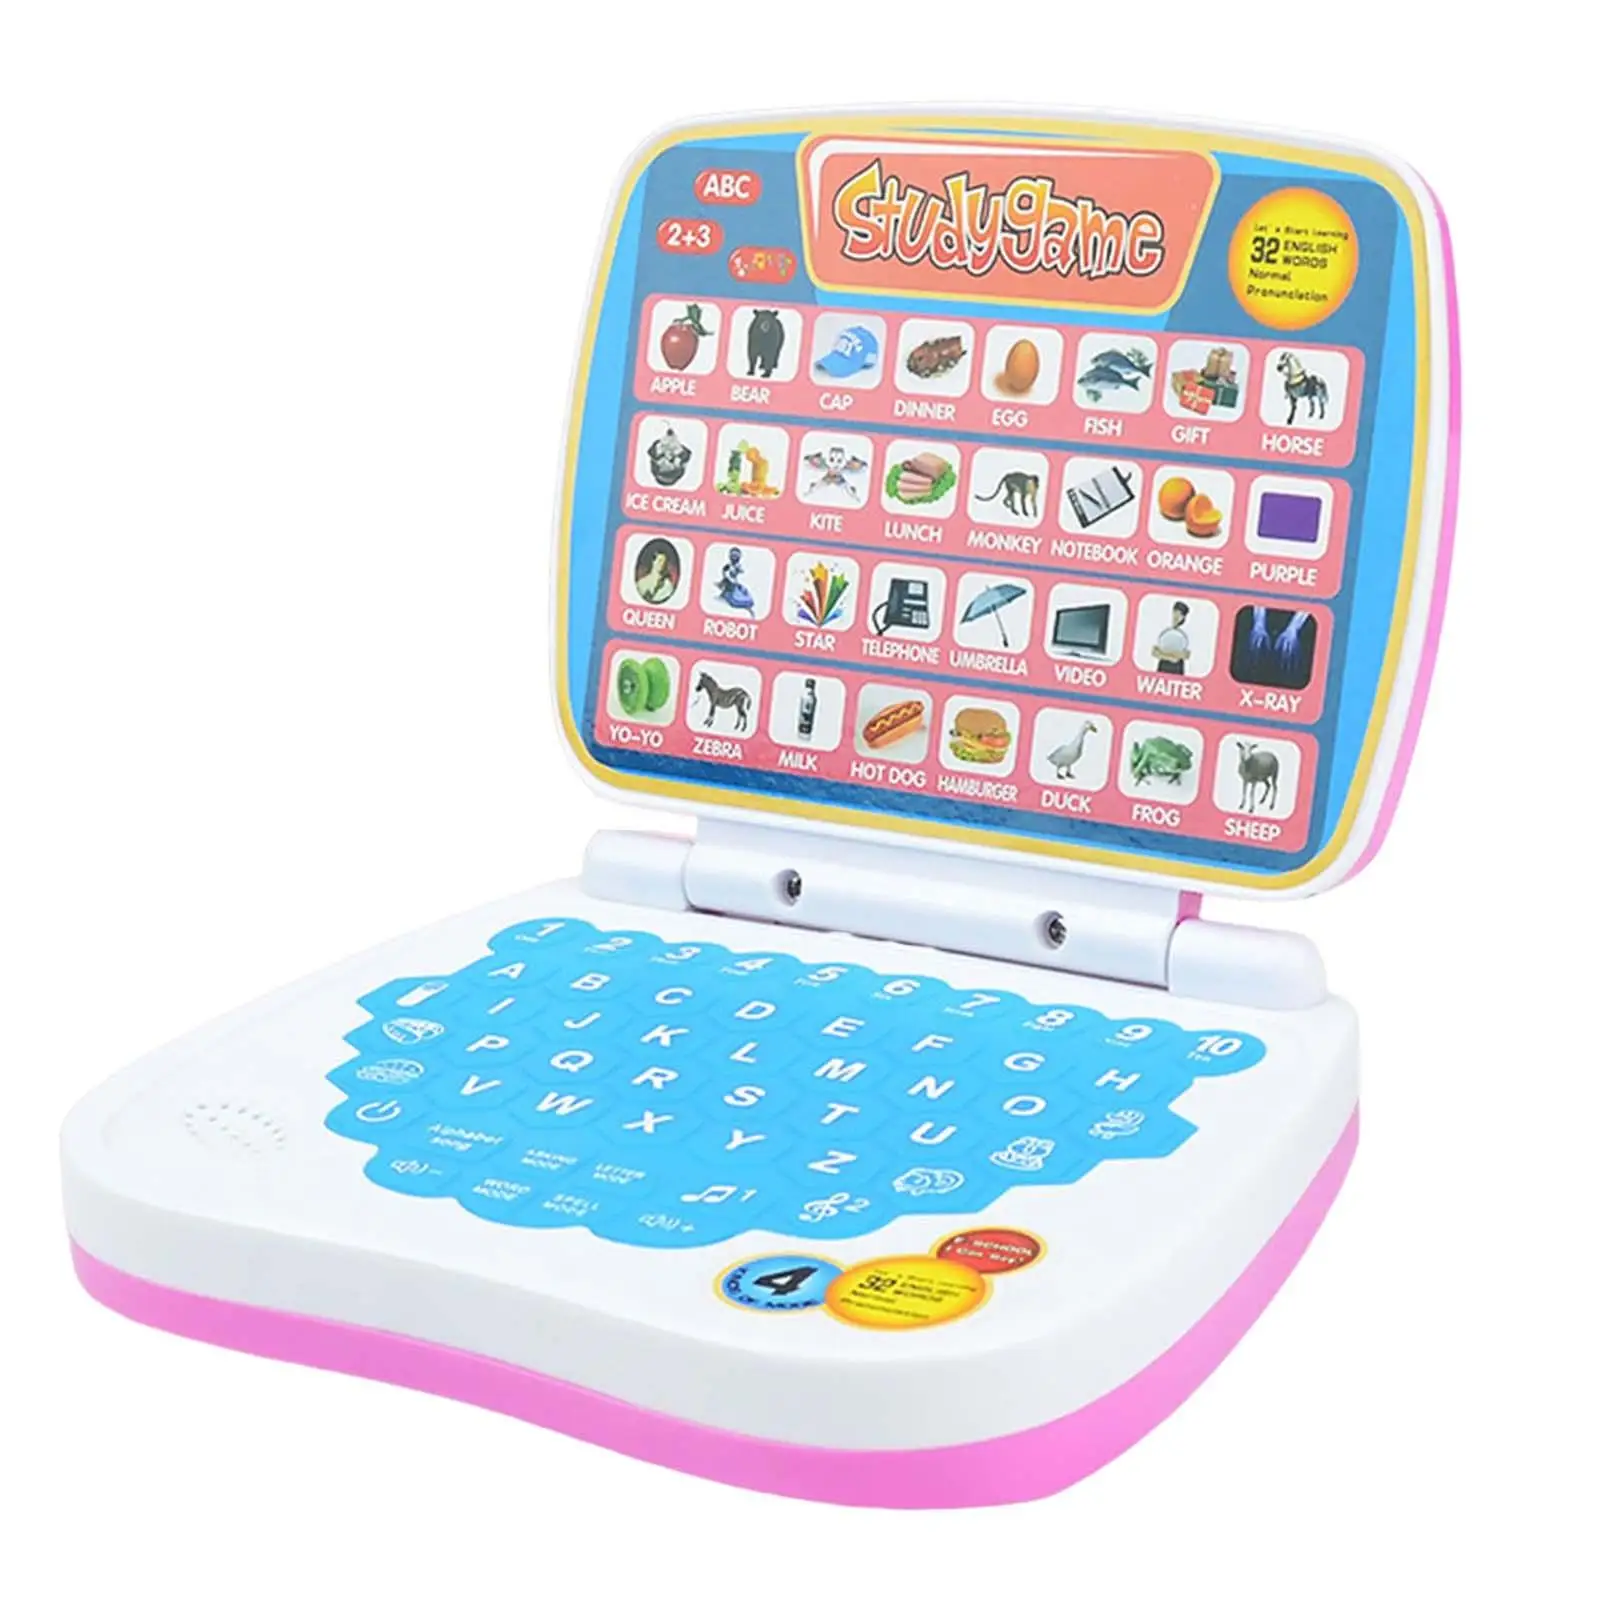 Multifunction Kids Laptop Toy Computer Study Game English Early Education Learning Machine for Children Girls Boys Toddler